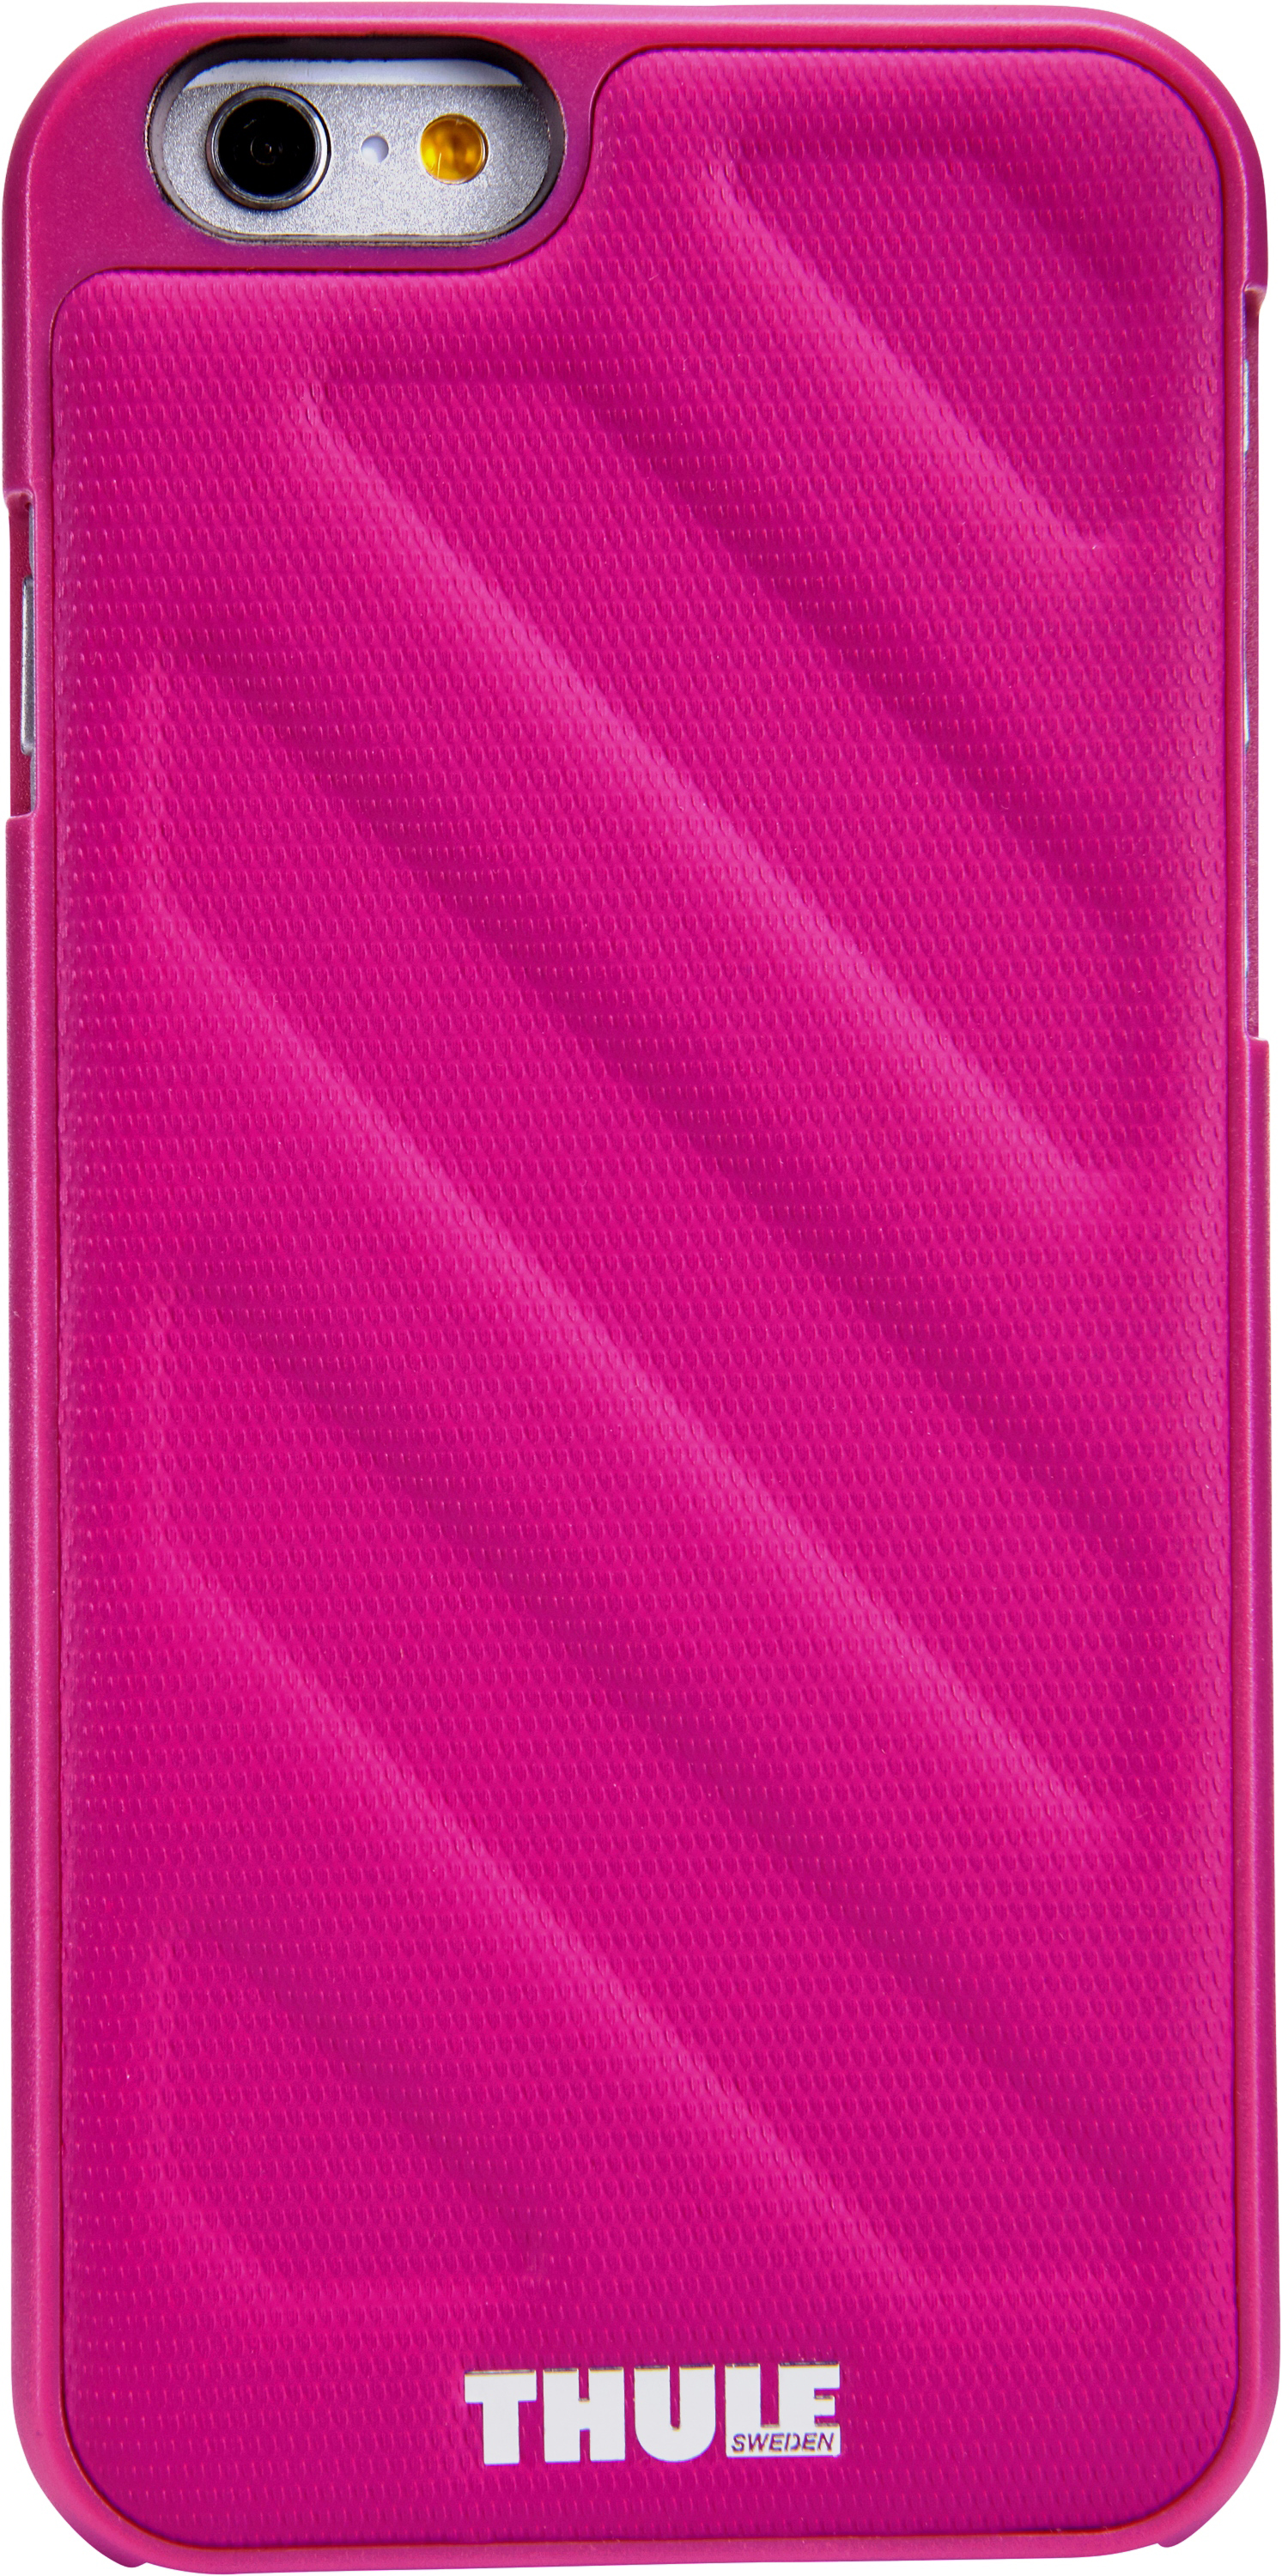 Pink iPhone 6s, iPhone Backcover, THULE Apple, 6, Gauntlet 1.0, TGIE2124ORC